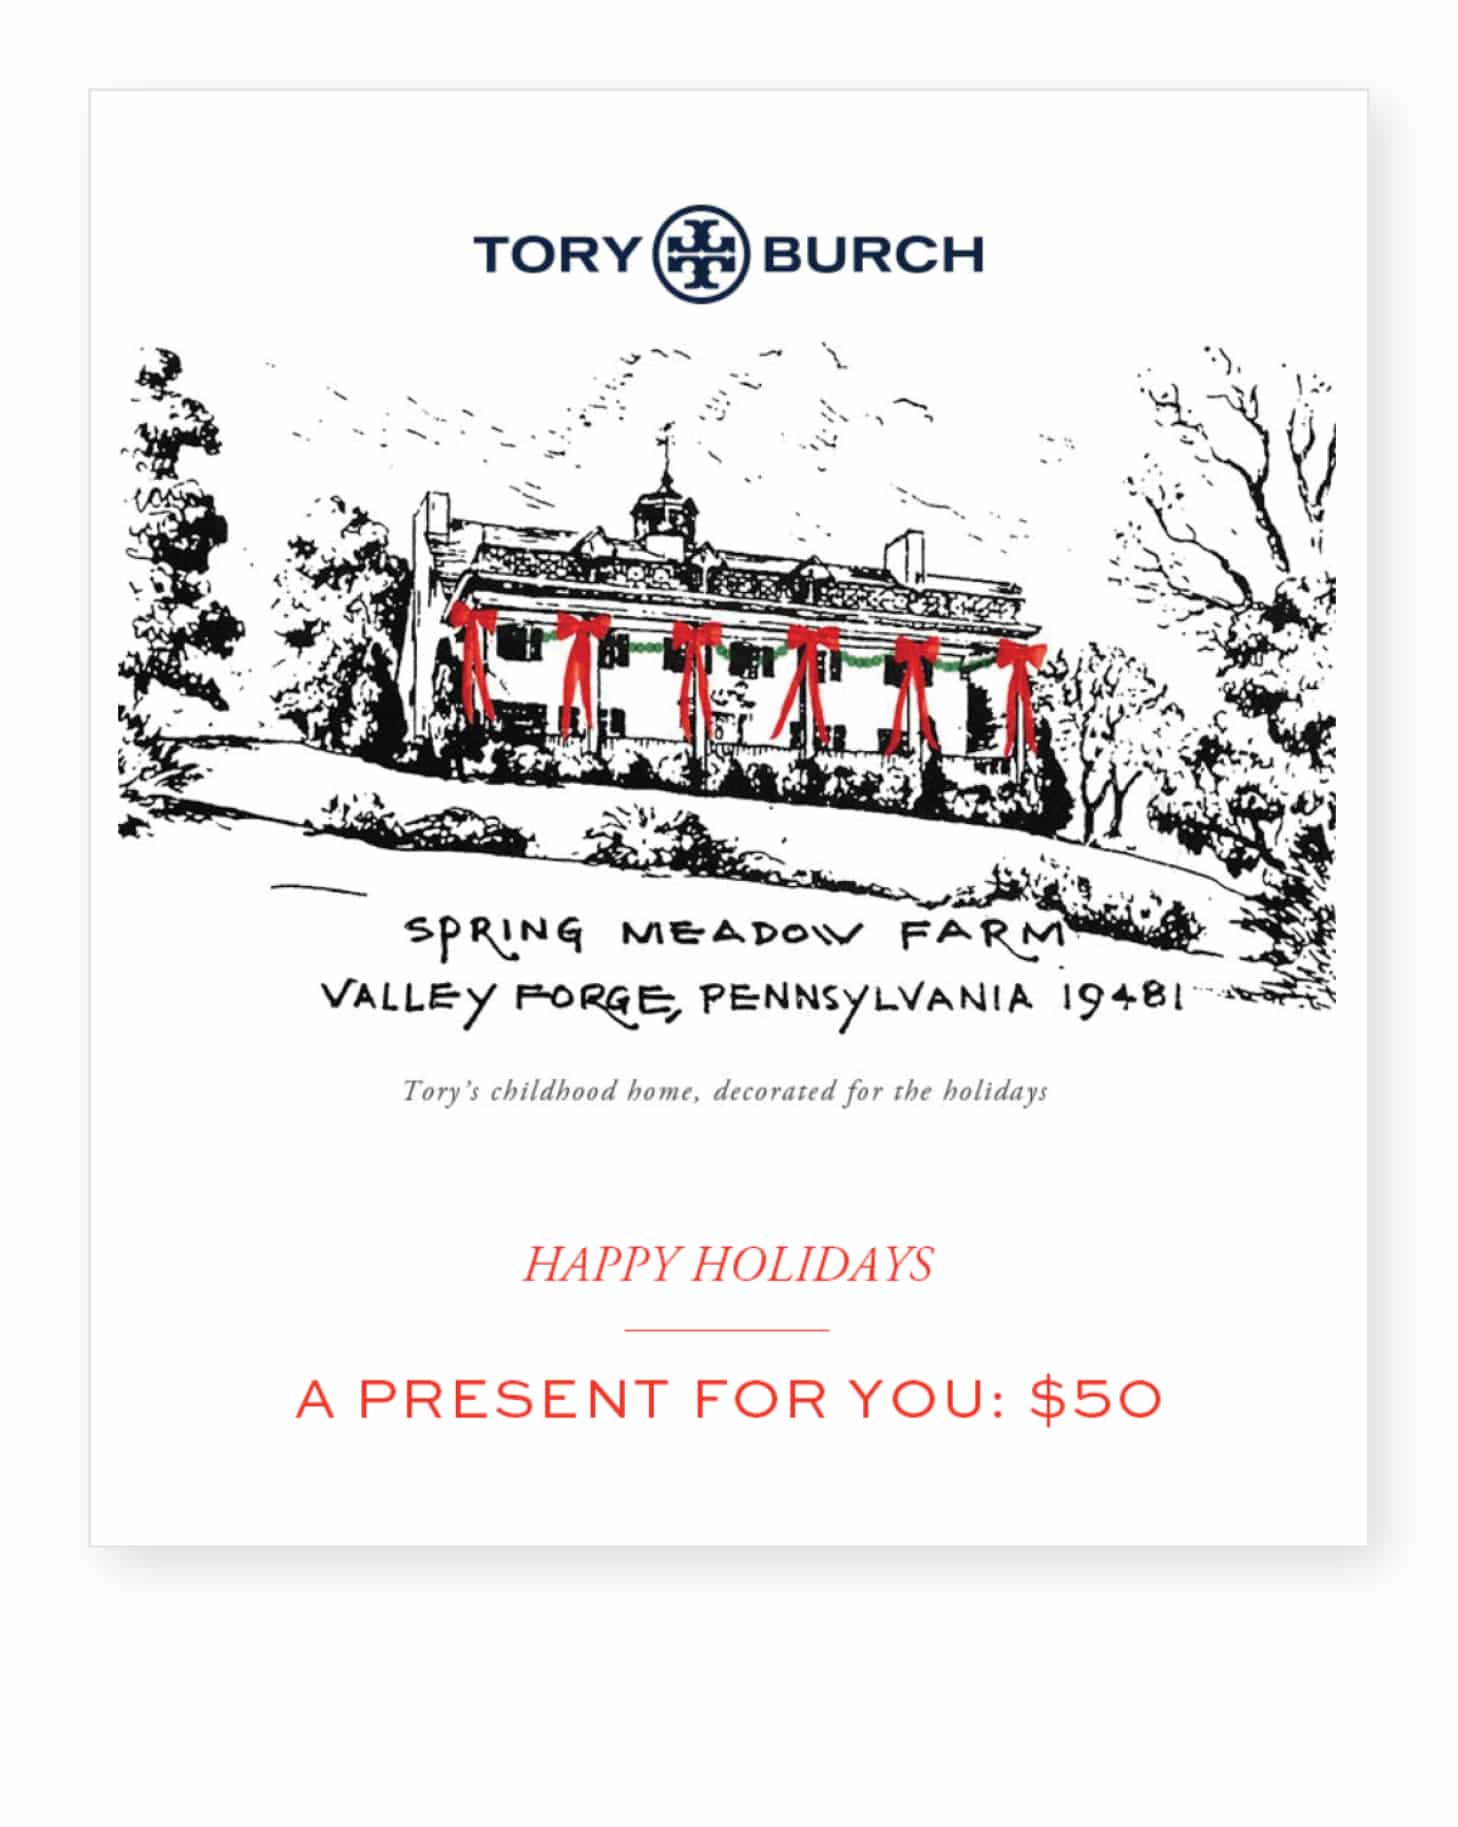 Tory Burch, Food52, Fabletics: Winning the Holidays With Email